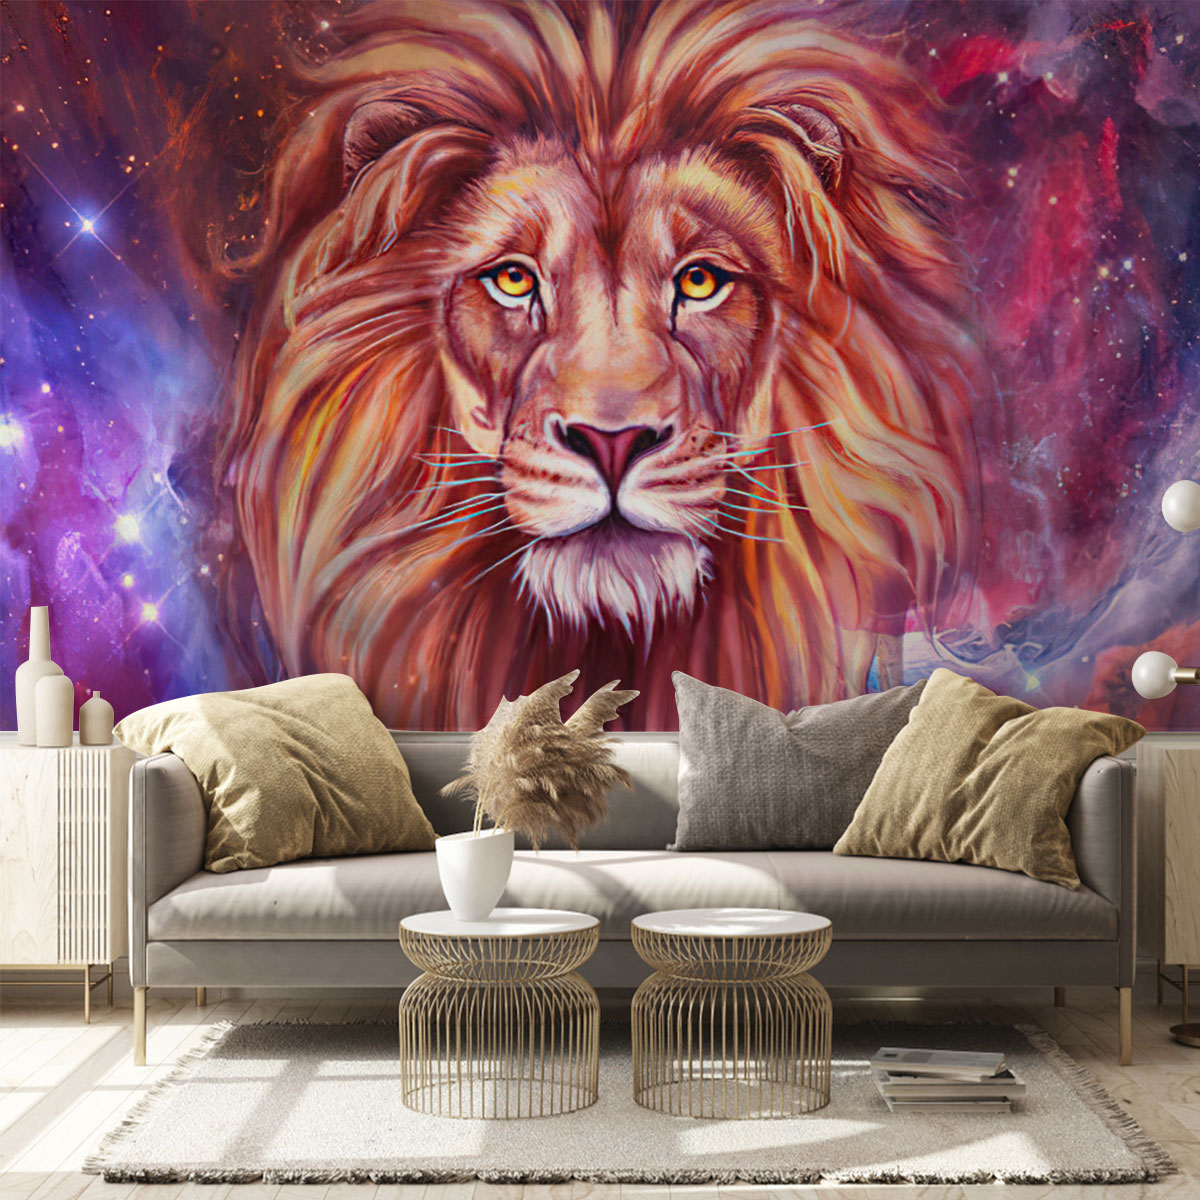 Universe Lion Wall Mural